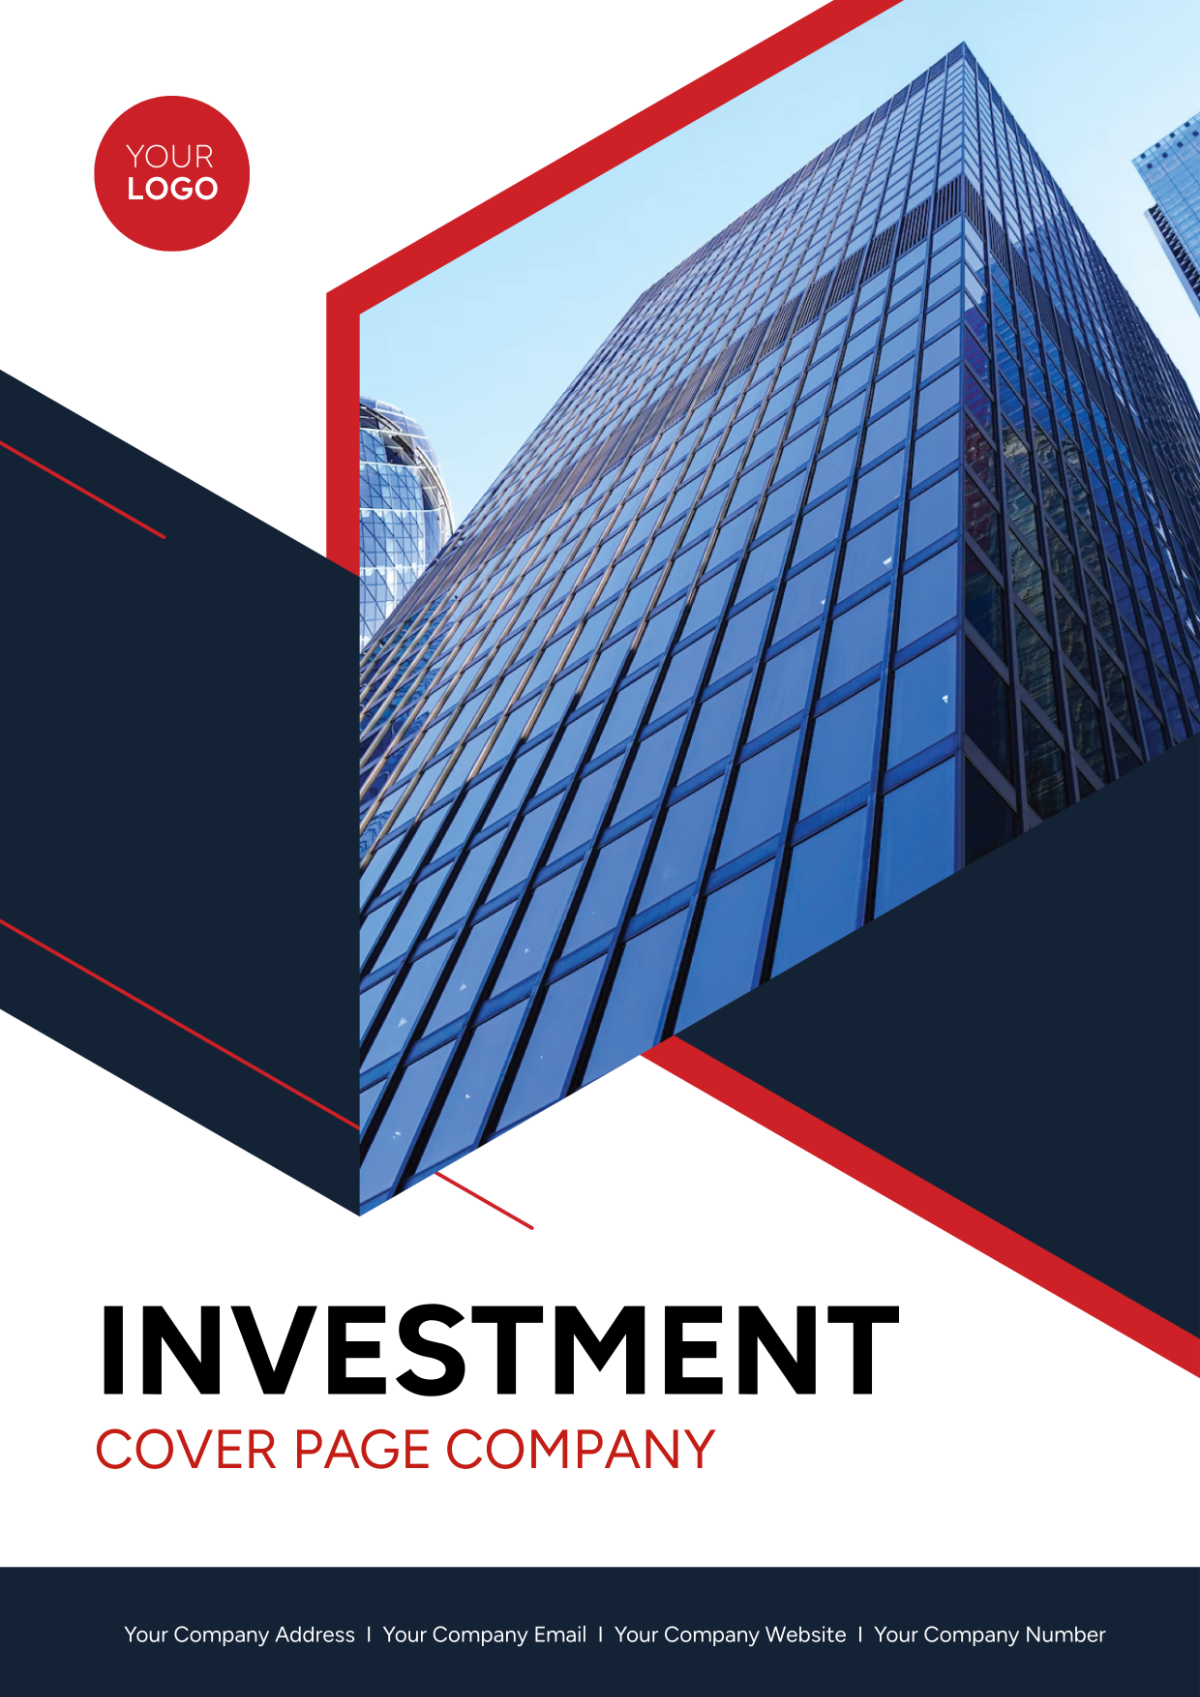 Investment Cover Page Company